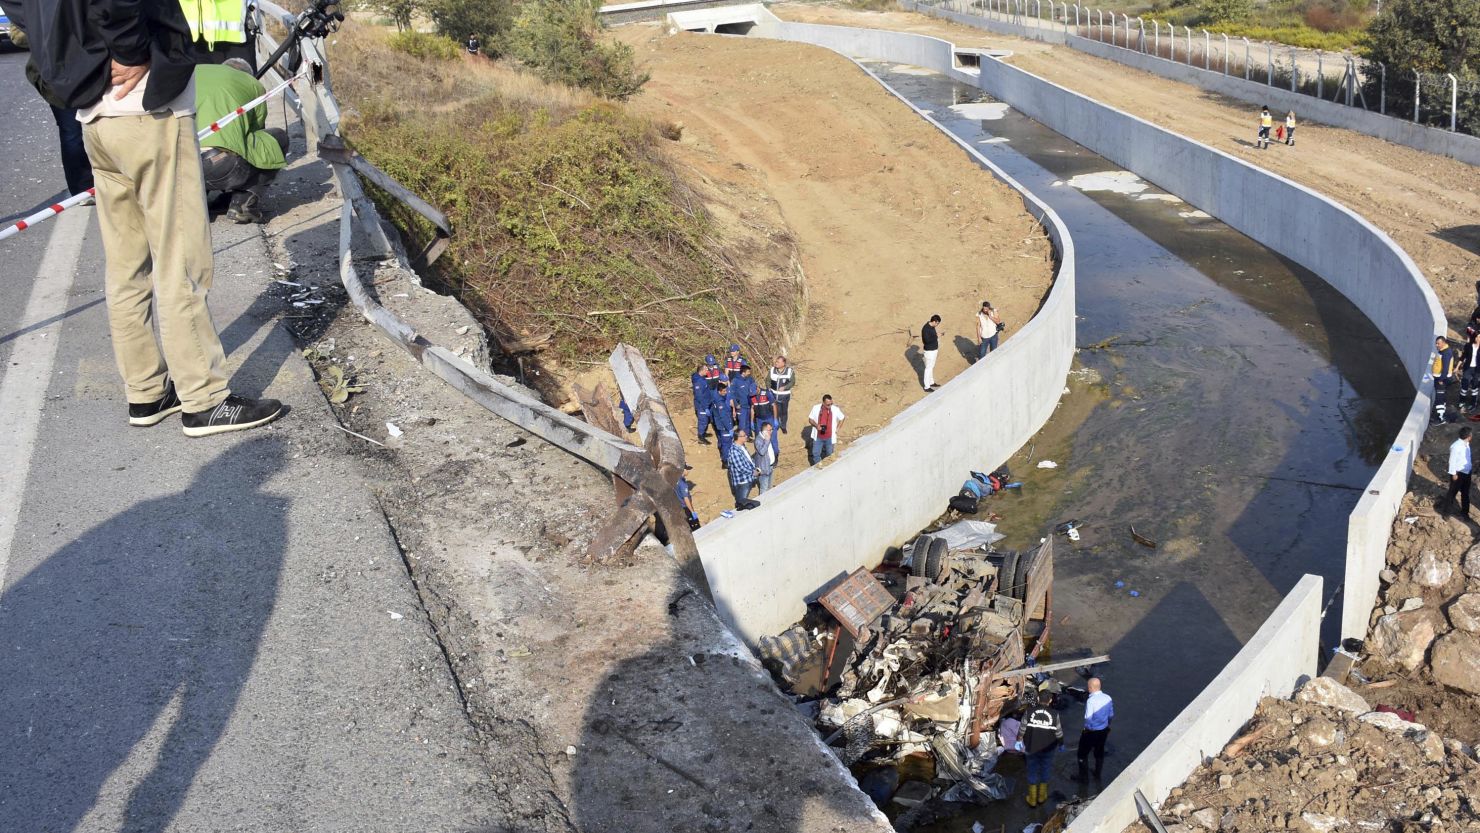 Rescue workers inspect an overturned truck in Izmir province.